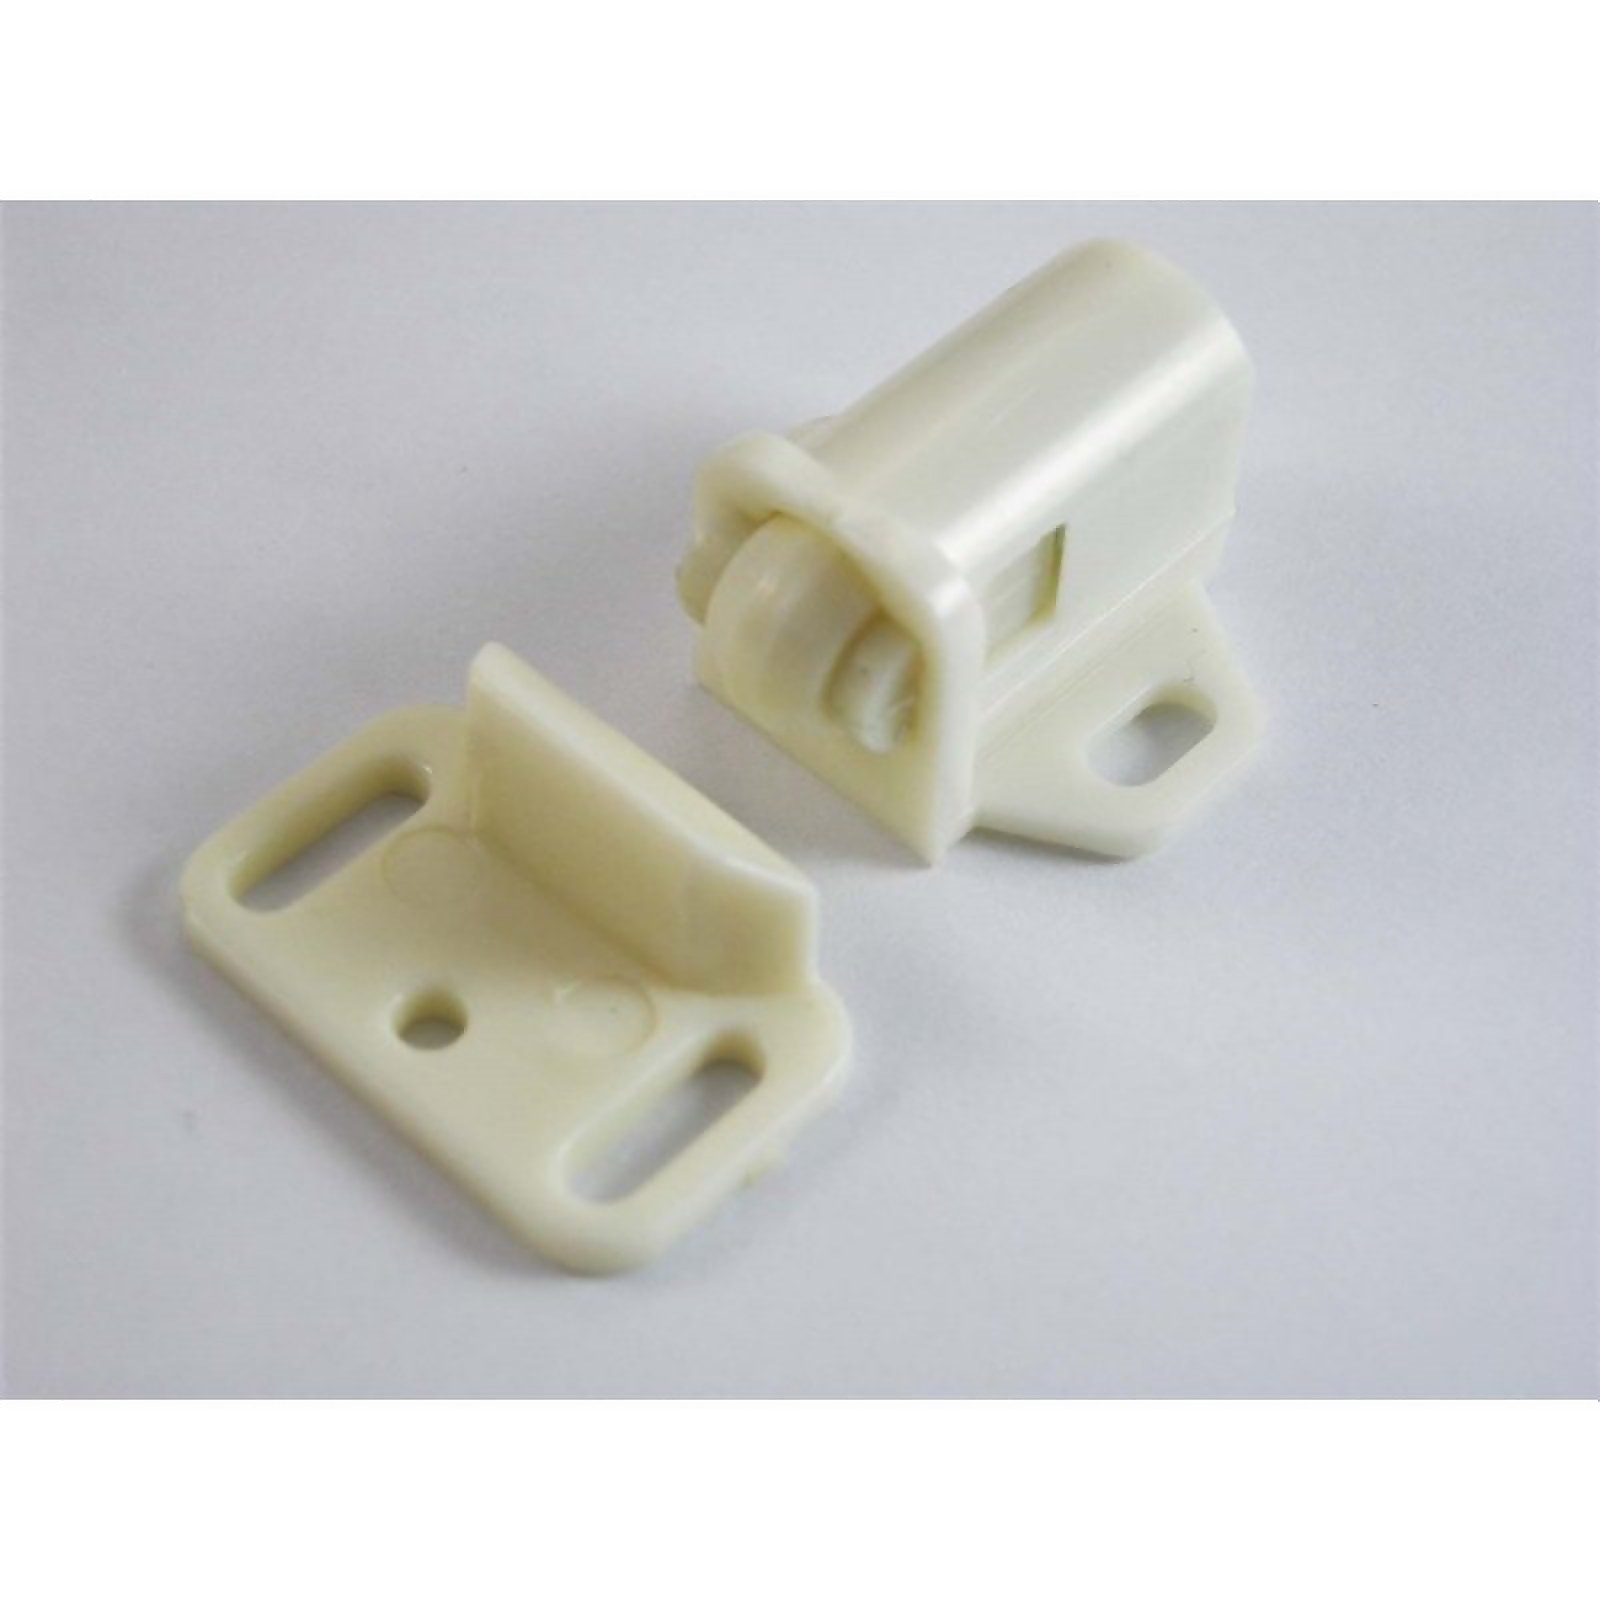 Photo of Surface Catch - White - 16mm - 2 Pack